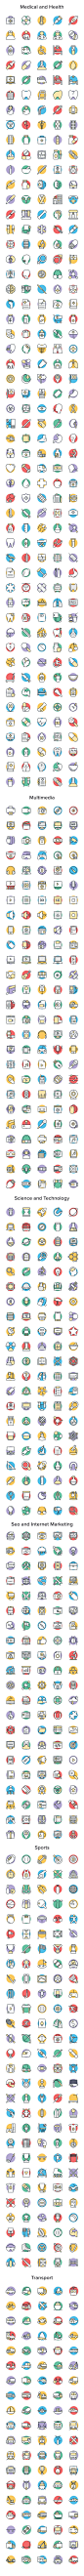 2900+ Cool Vector Icon Sets Bundle - Icons - 4